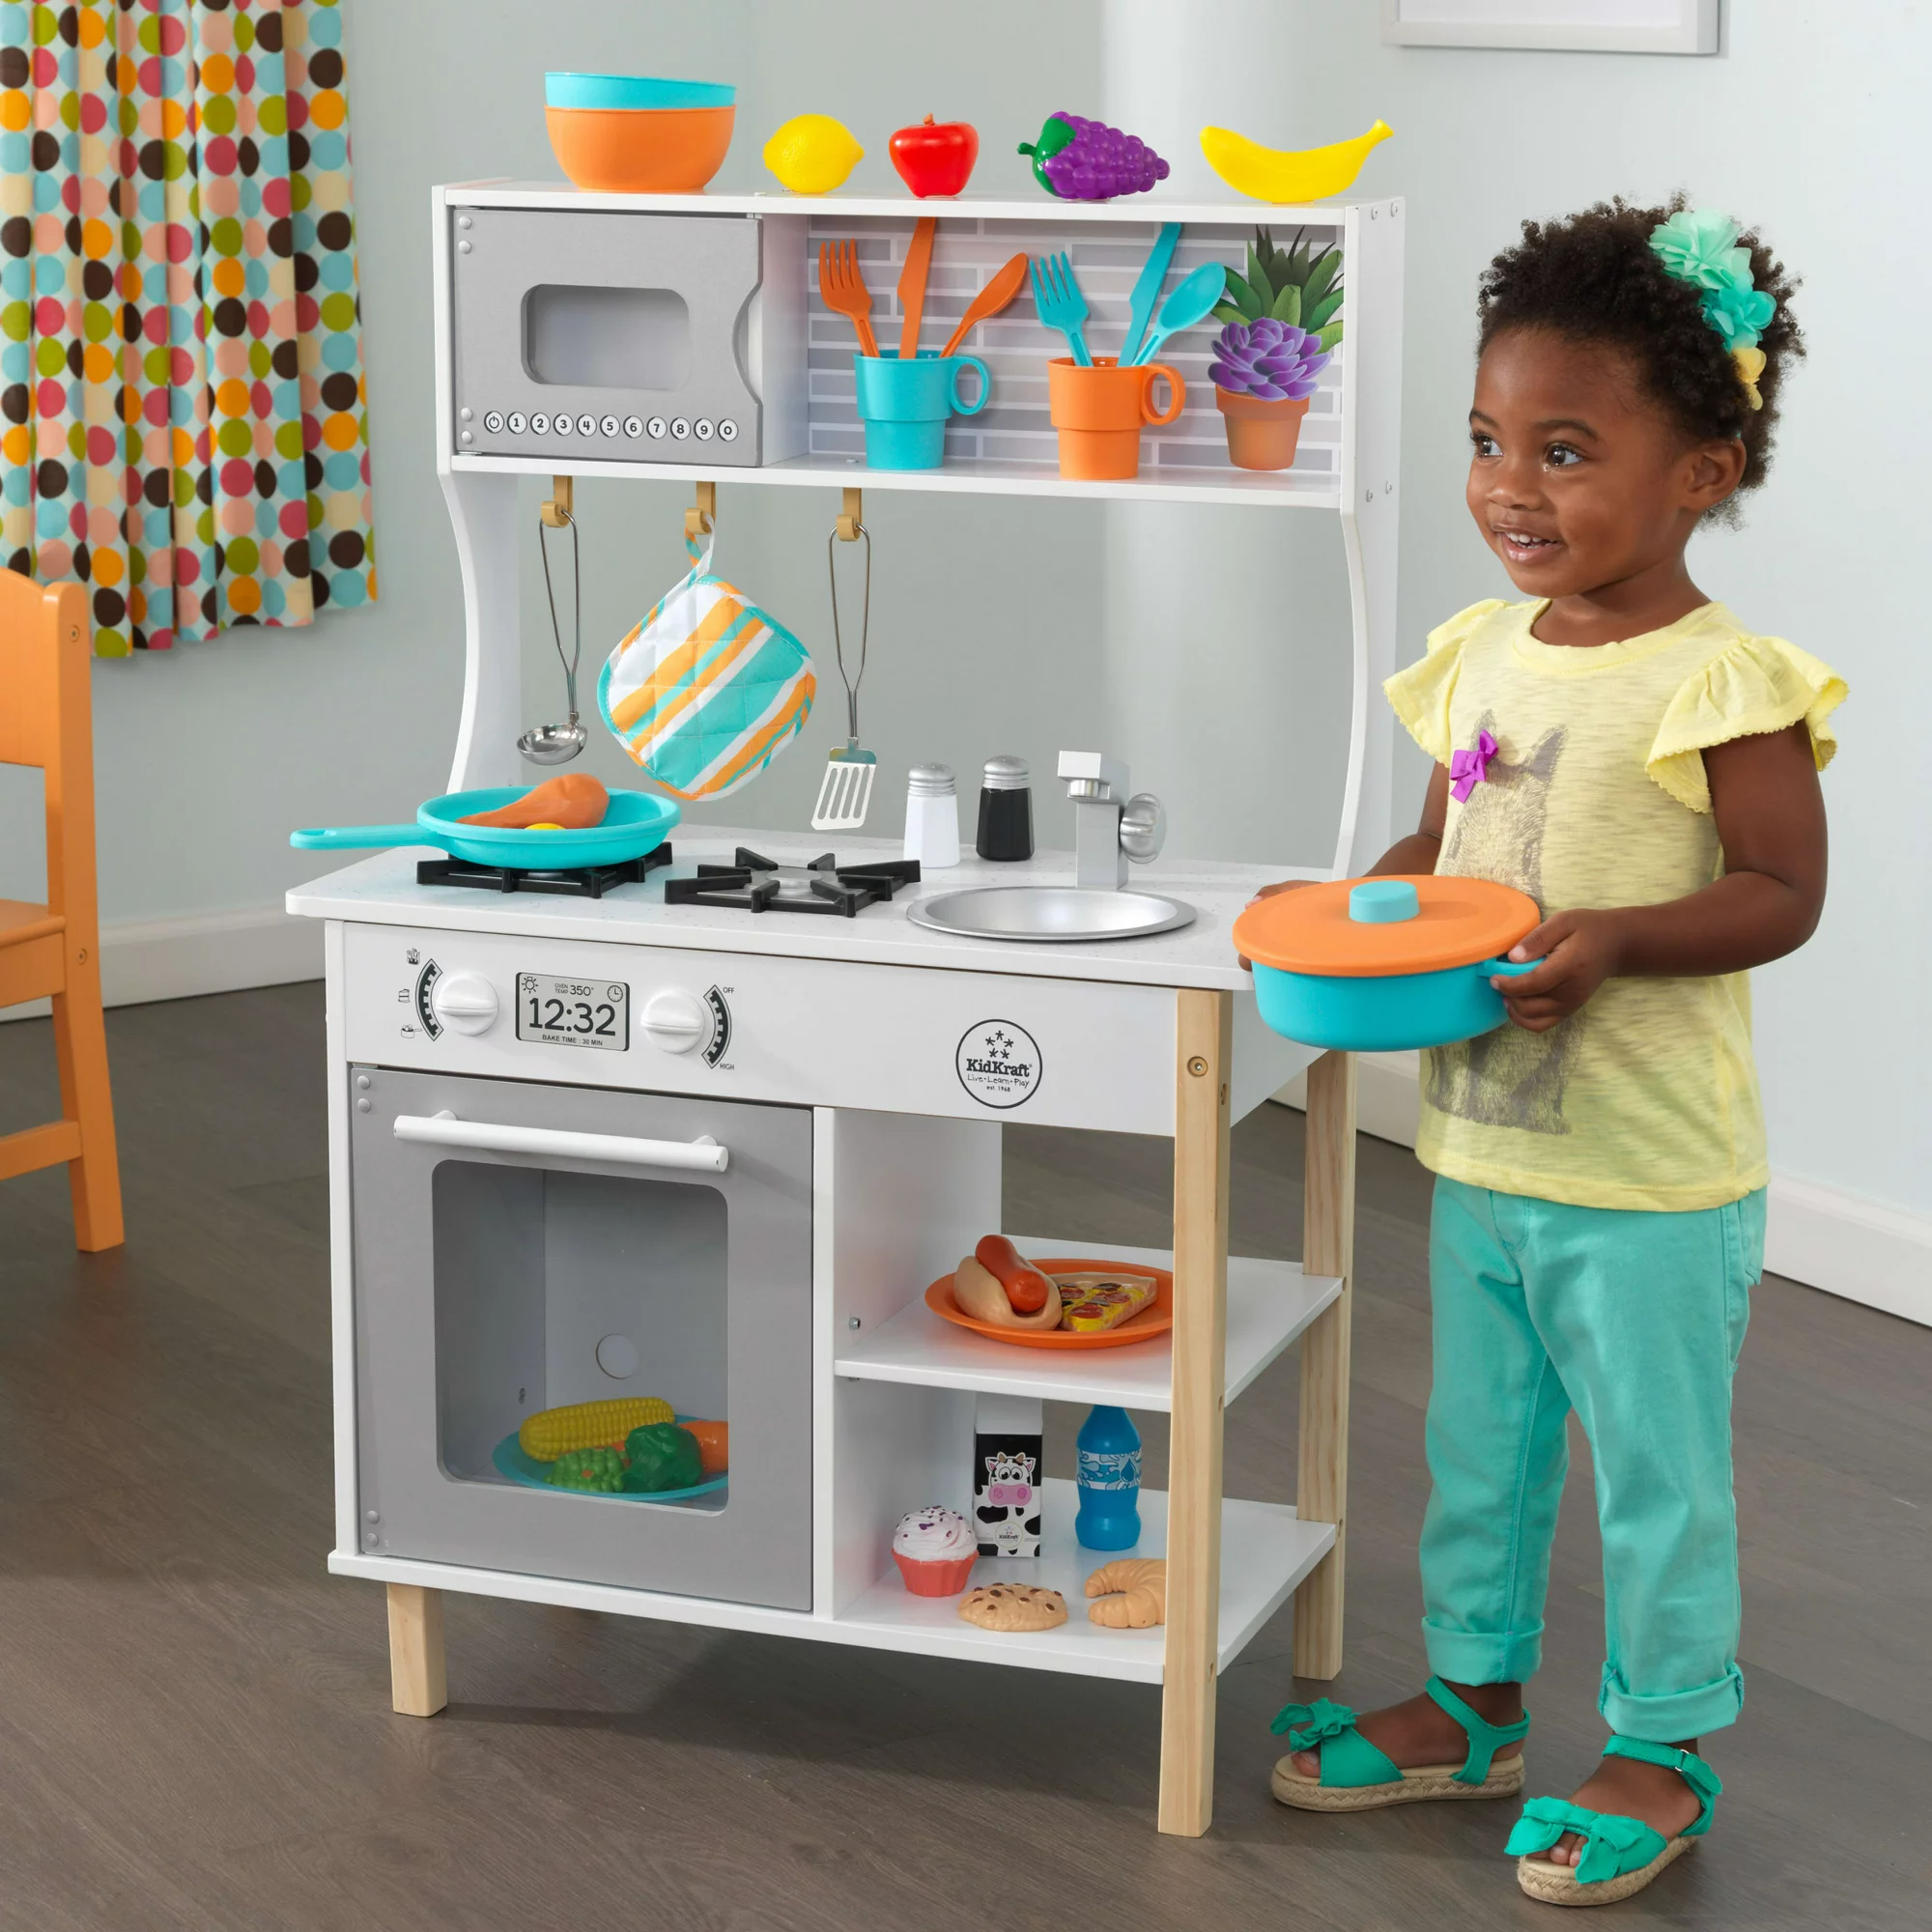 Child interacting with kitchen playset